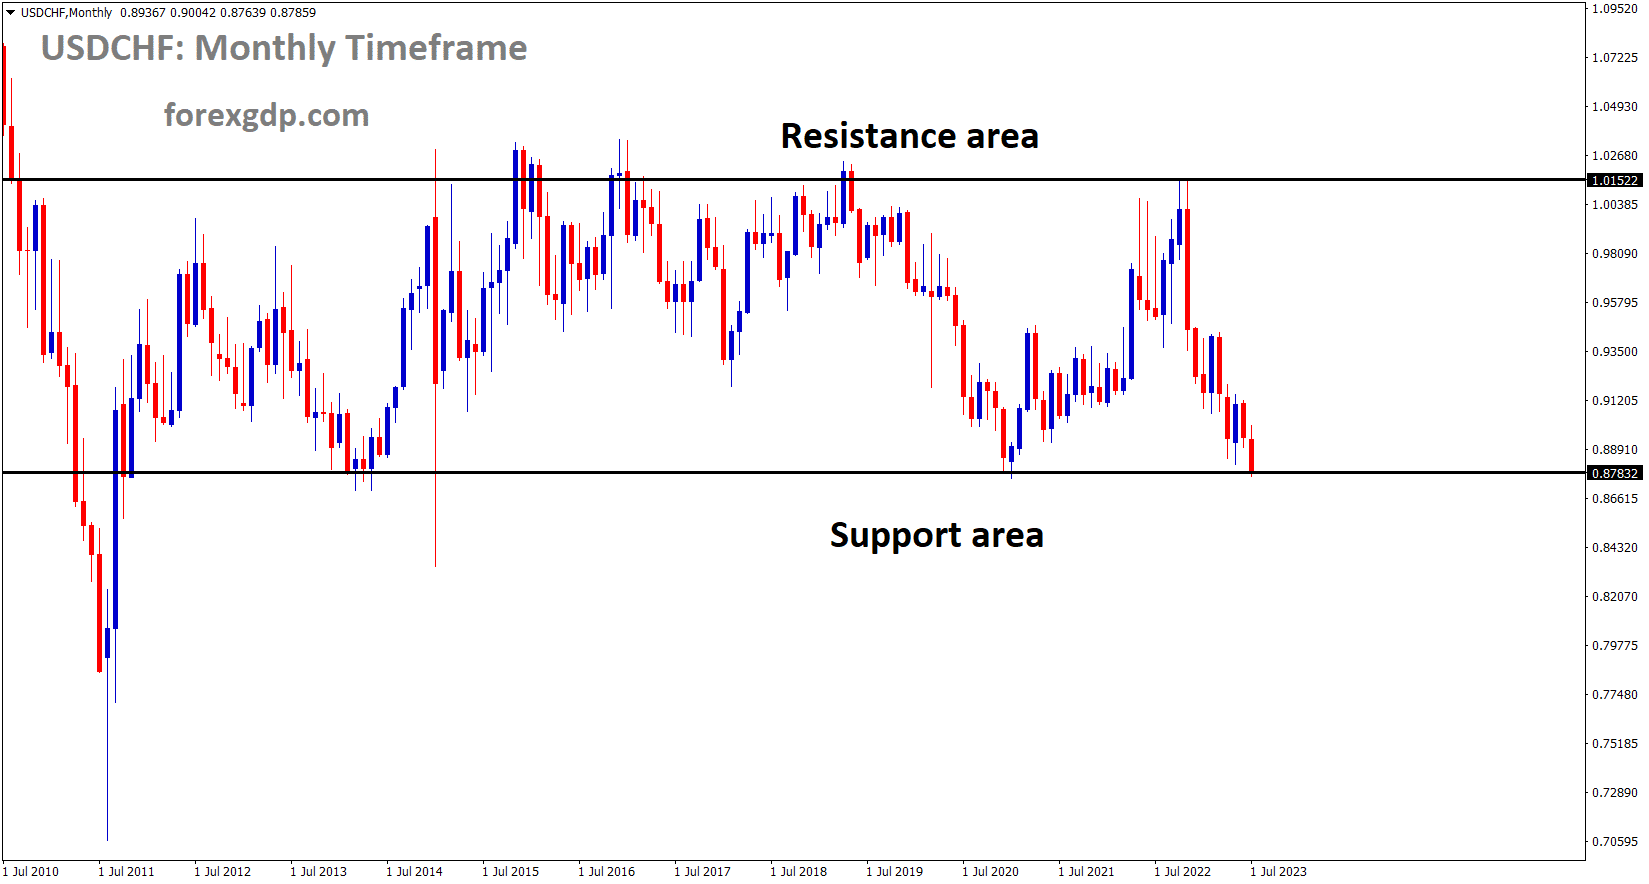 USDCHF is moving in the Box pattern and the market has reached the horizontal support area of the pattern